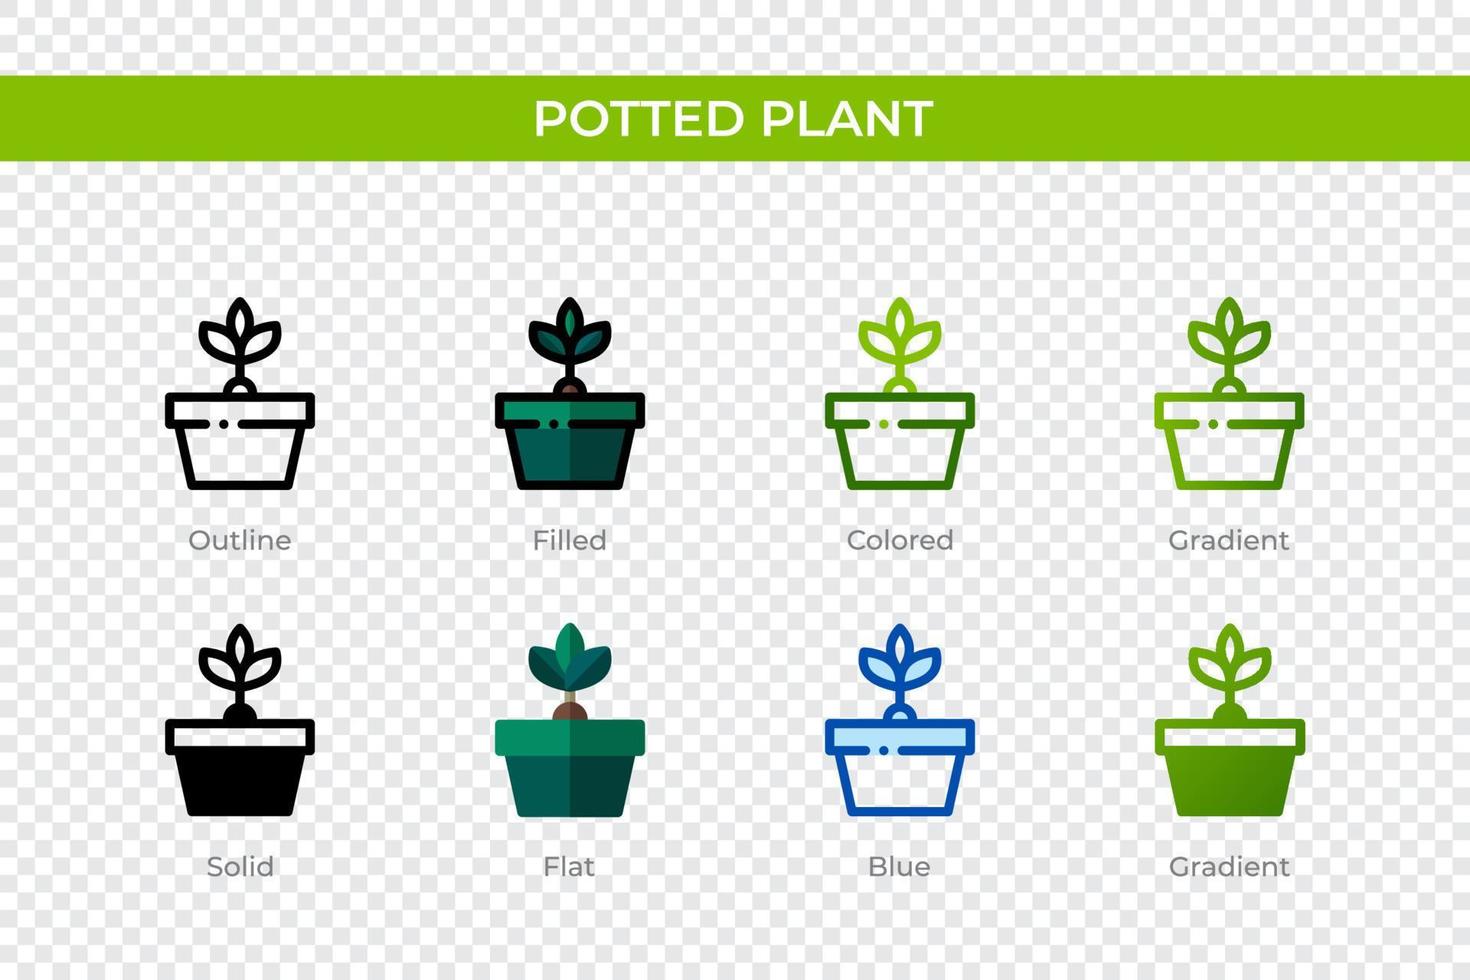 Potted plant icon in different style. Potted plant vector icons designed in outline, solid, colored, filled, gradient, and flat style. Symbol, logo illustration. Vector illustration